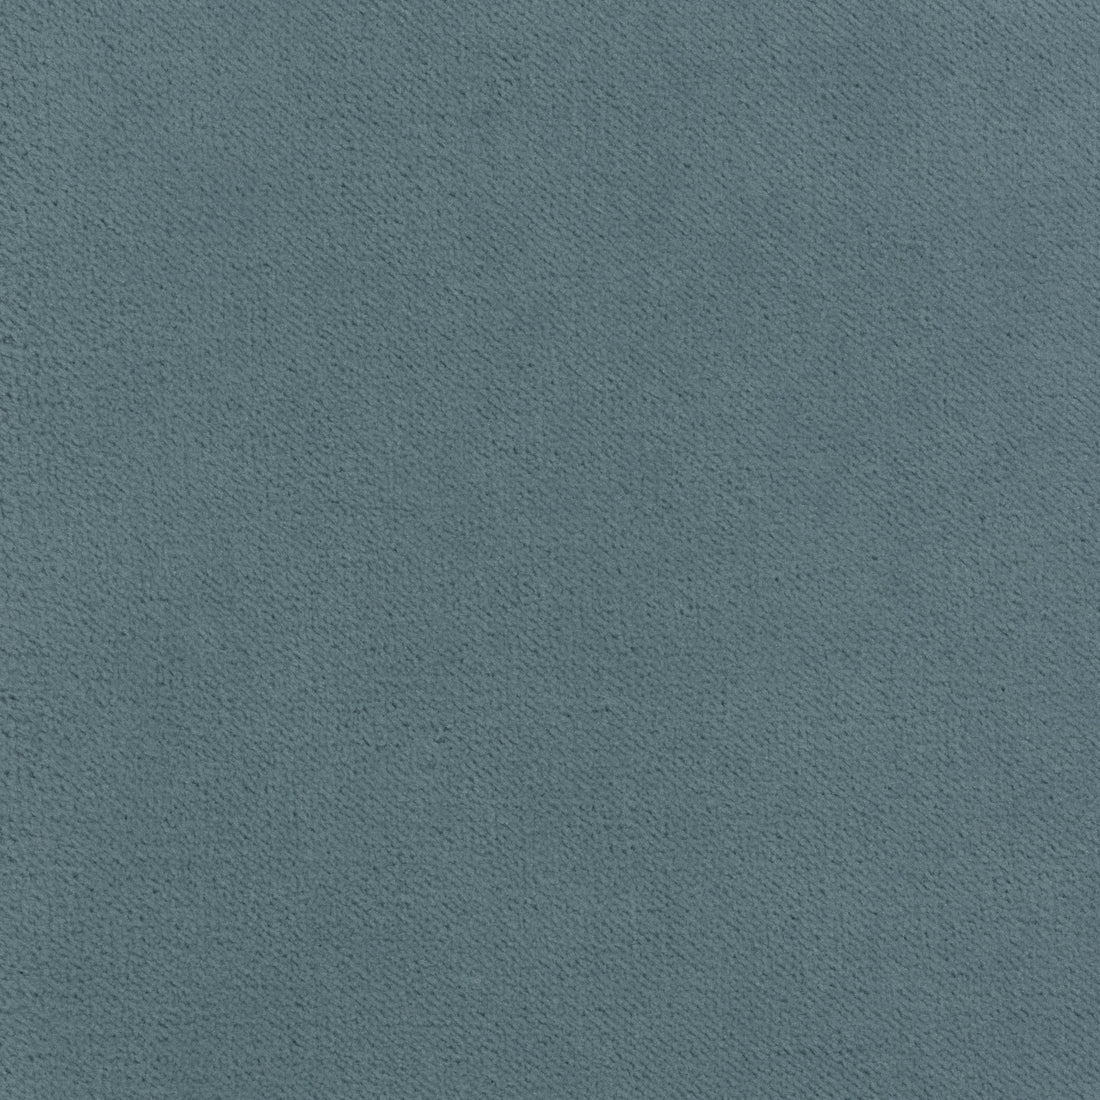 Club Velvet fabric in slate color - pattern number W7243 - by Thibaut in the Club Velvet collection